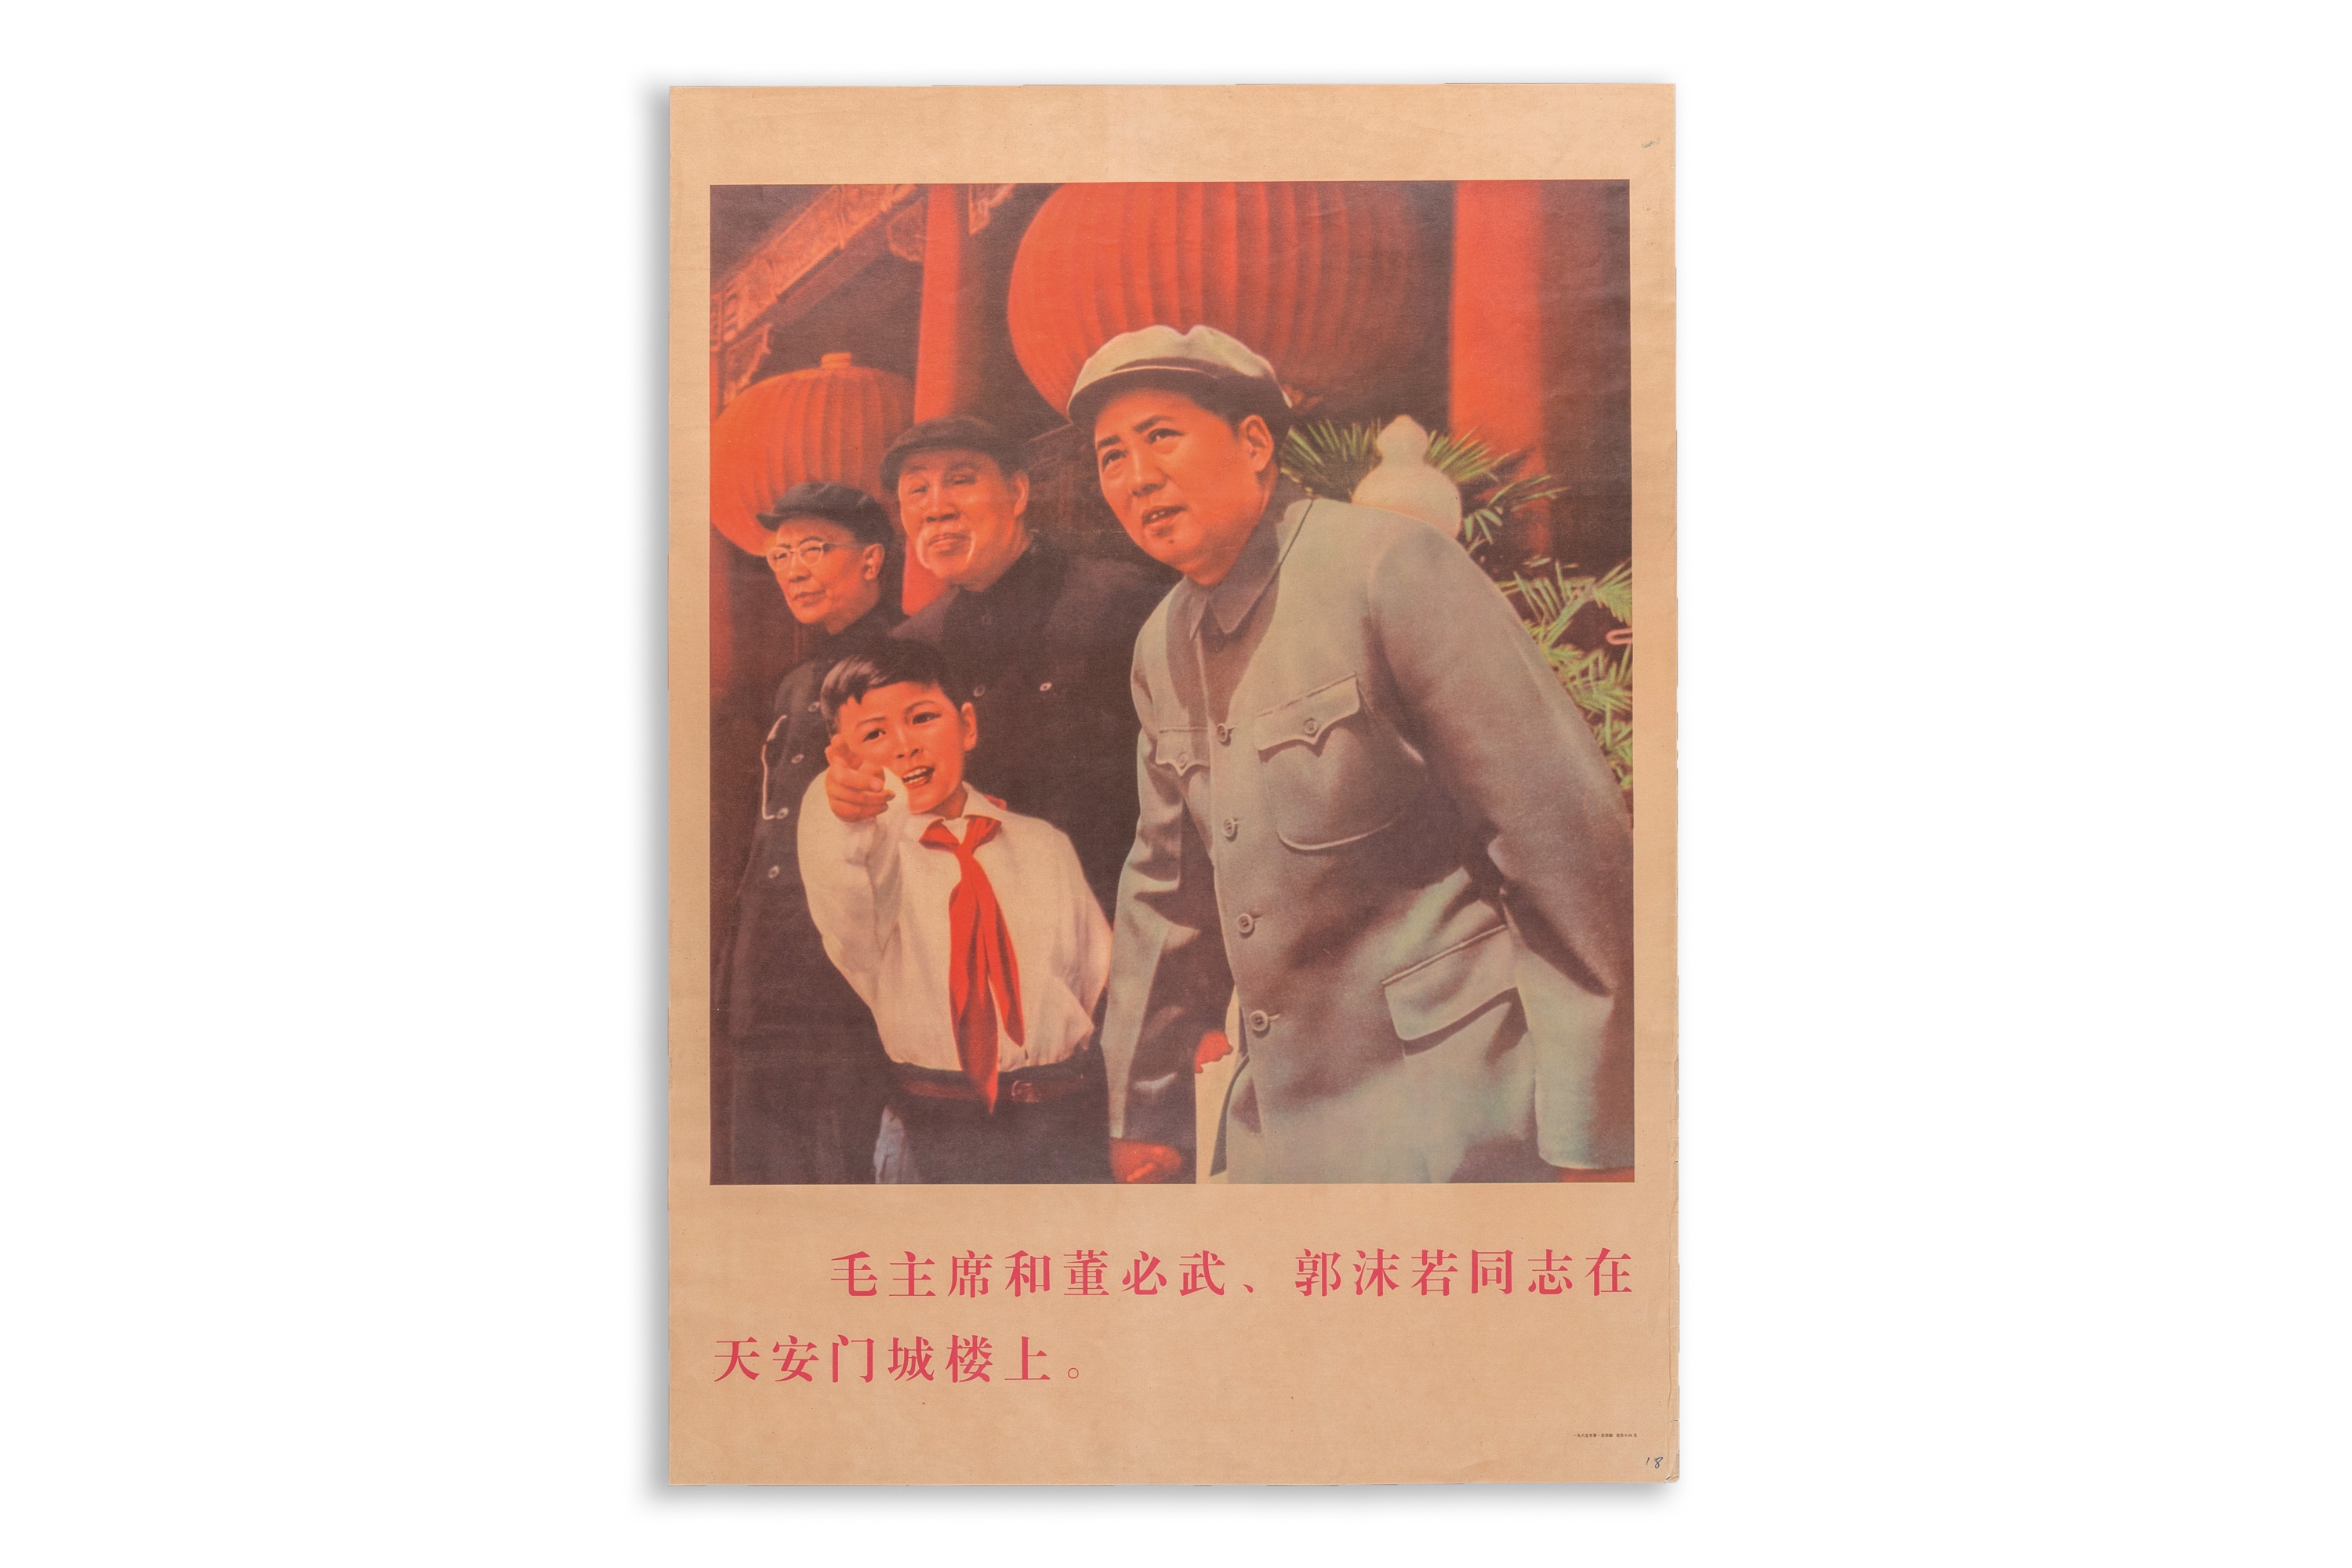 29 Chinese Cultural Revolution propaganda posters - Image 28 of 43